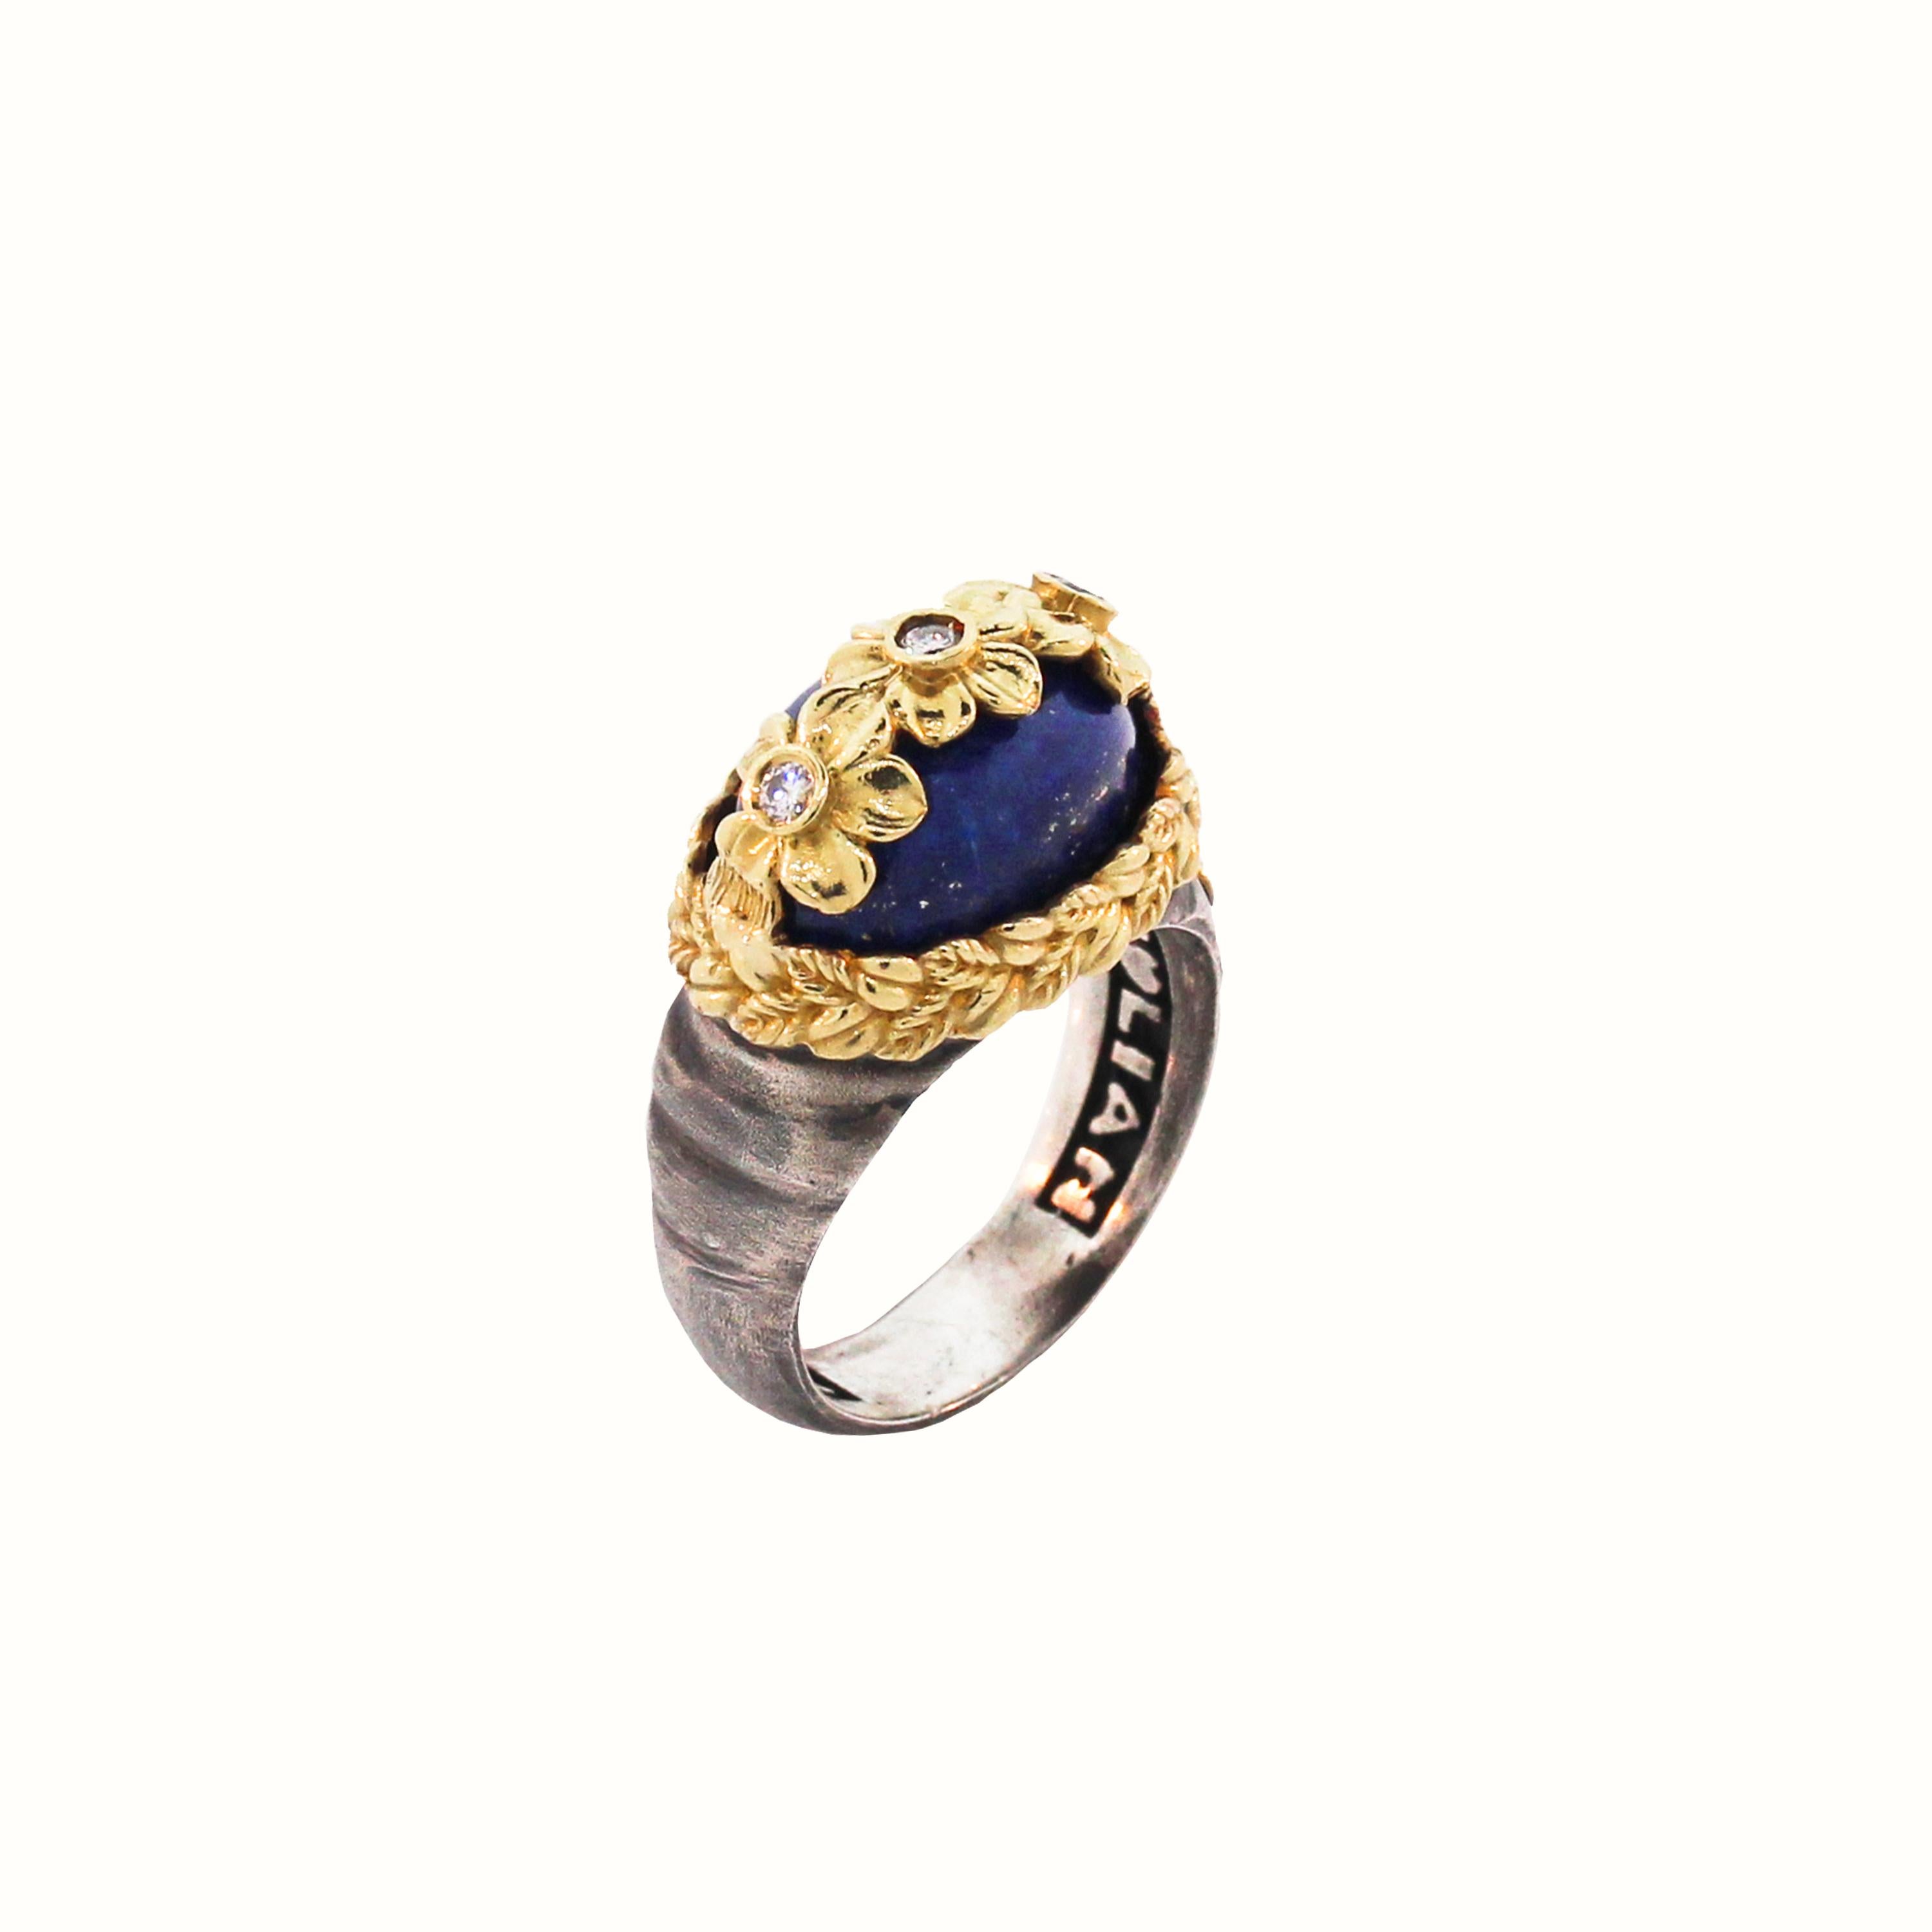 Women's Lapis Lazuli and Diamond Floral Ring with Sterling Silver and Gold Stambolian